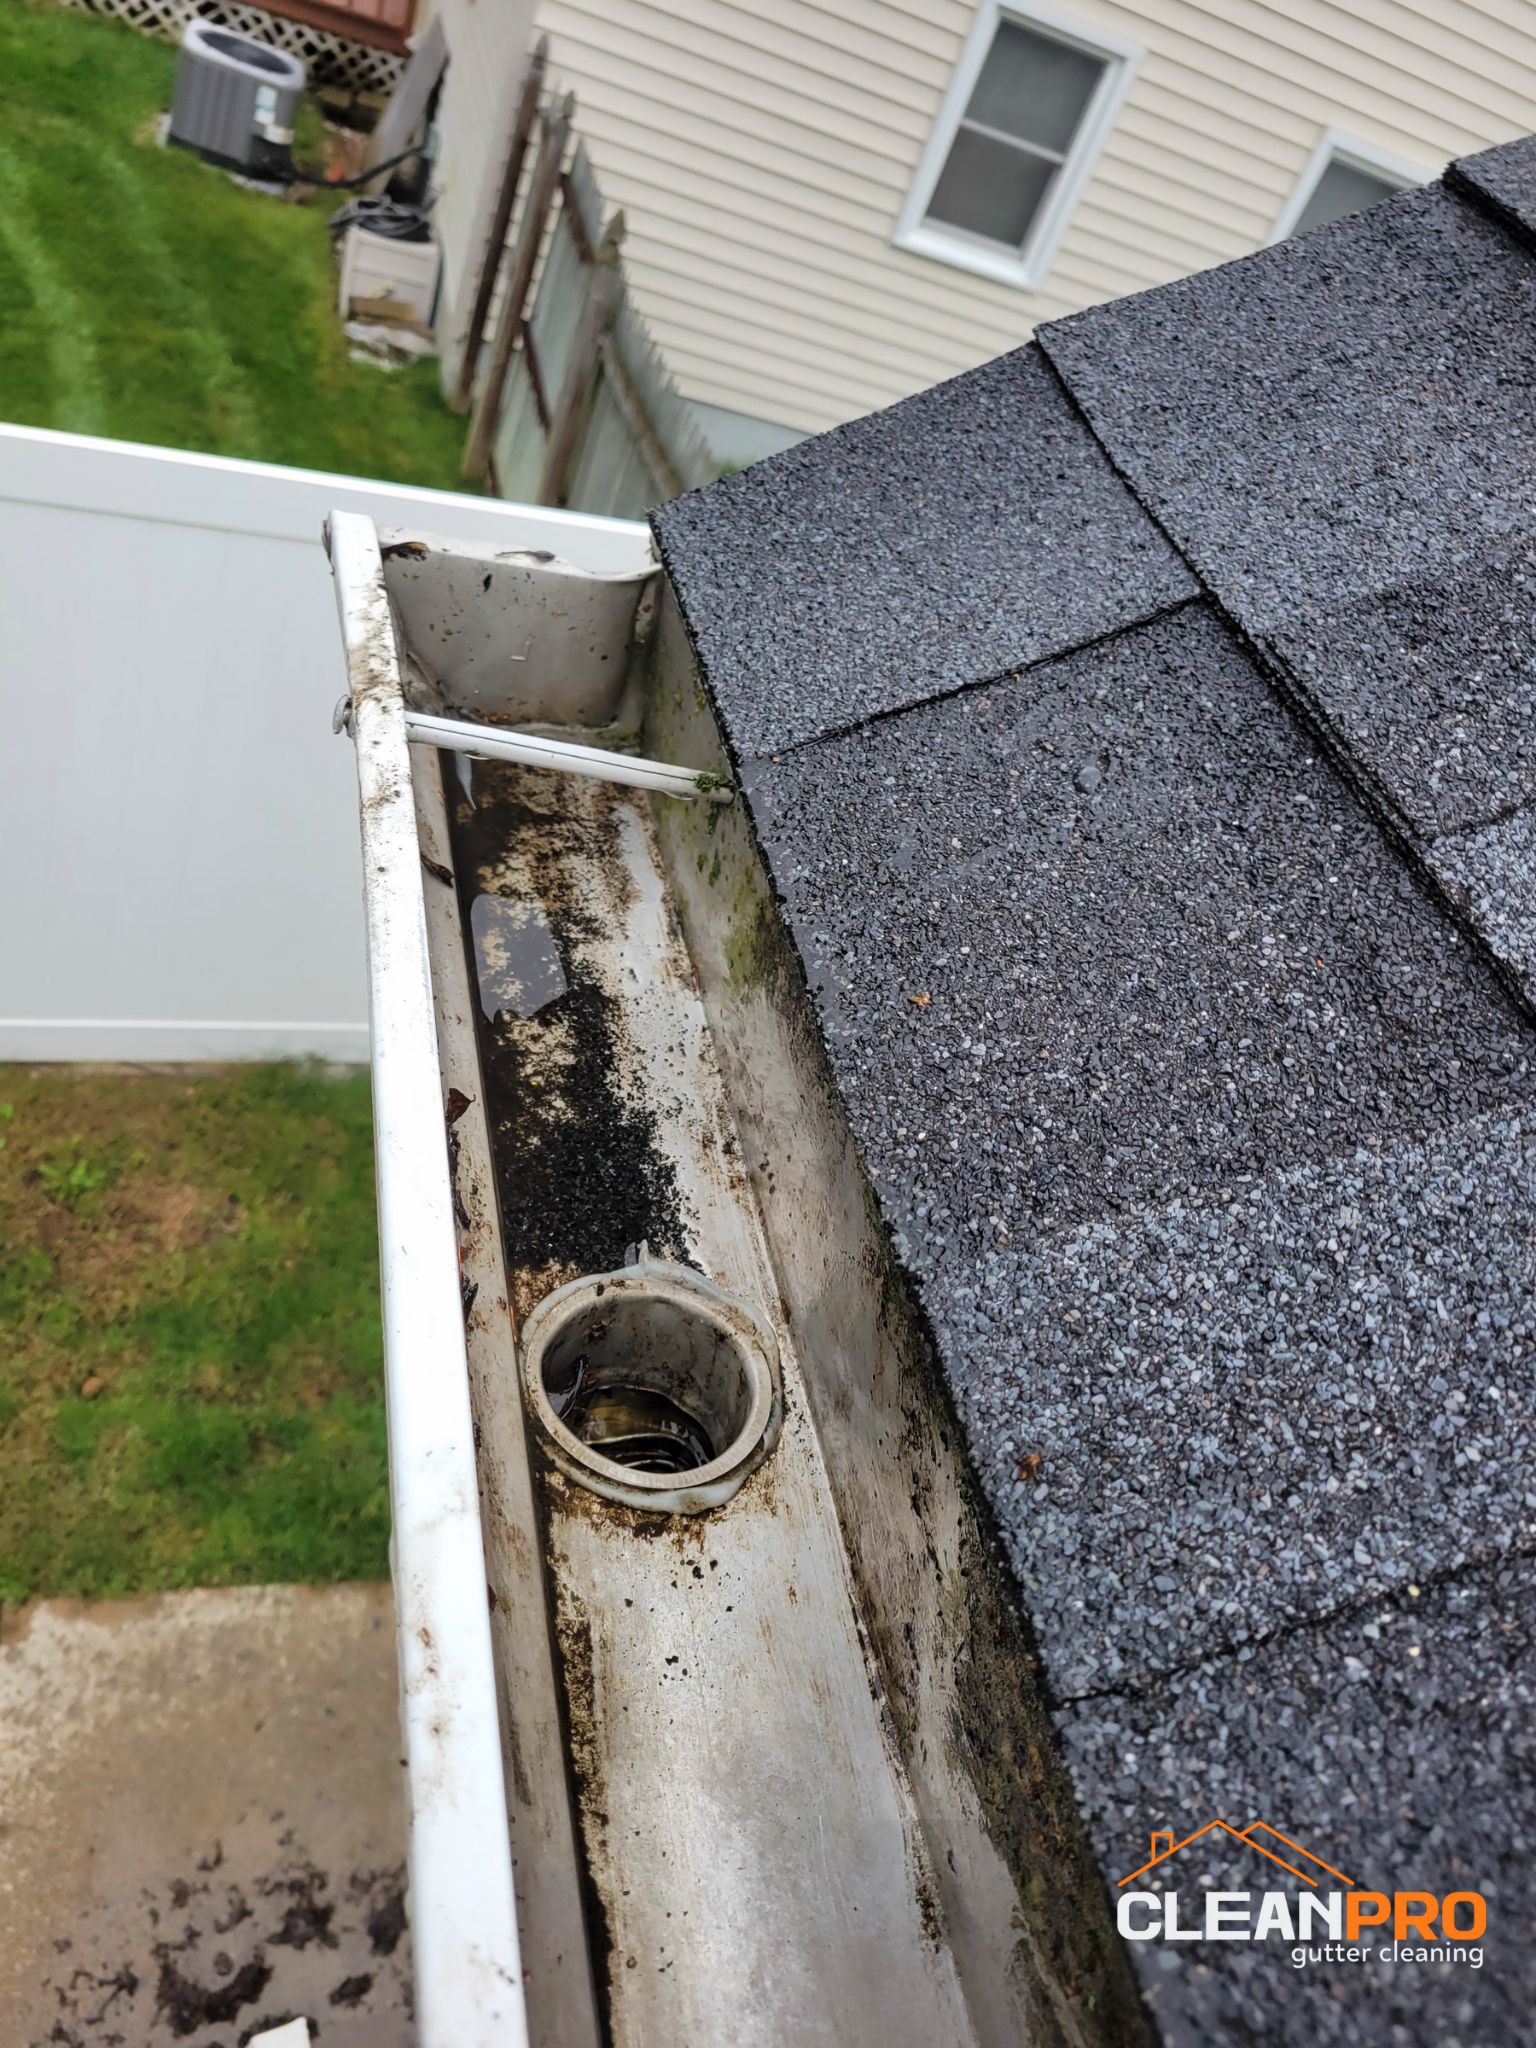 Quality Gutter Cleaning in Durham NC